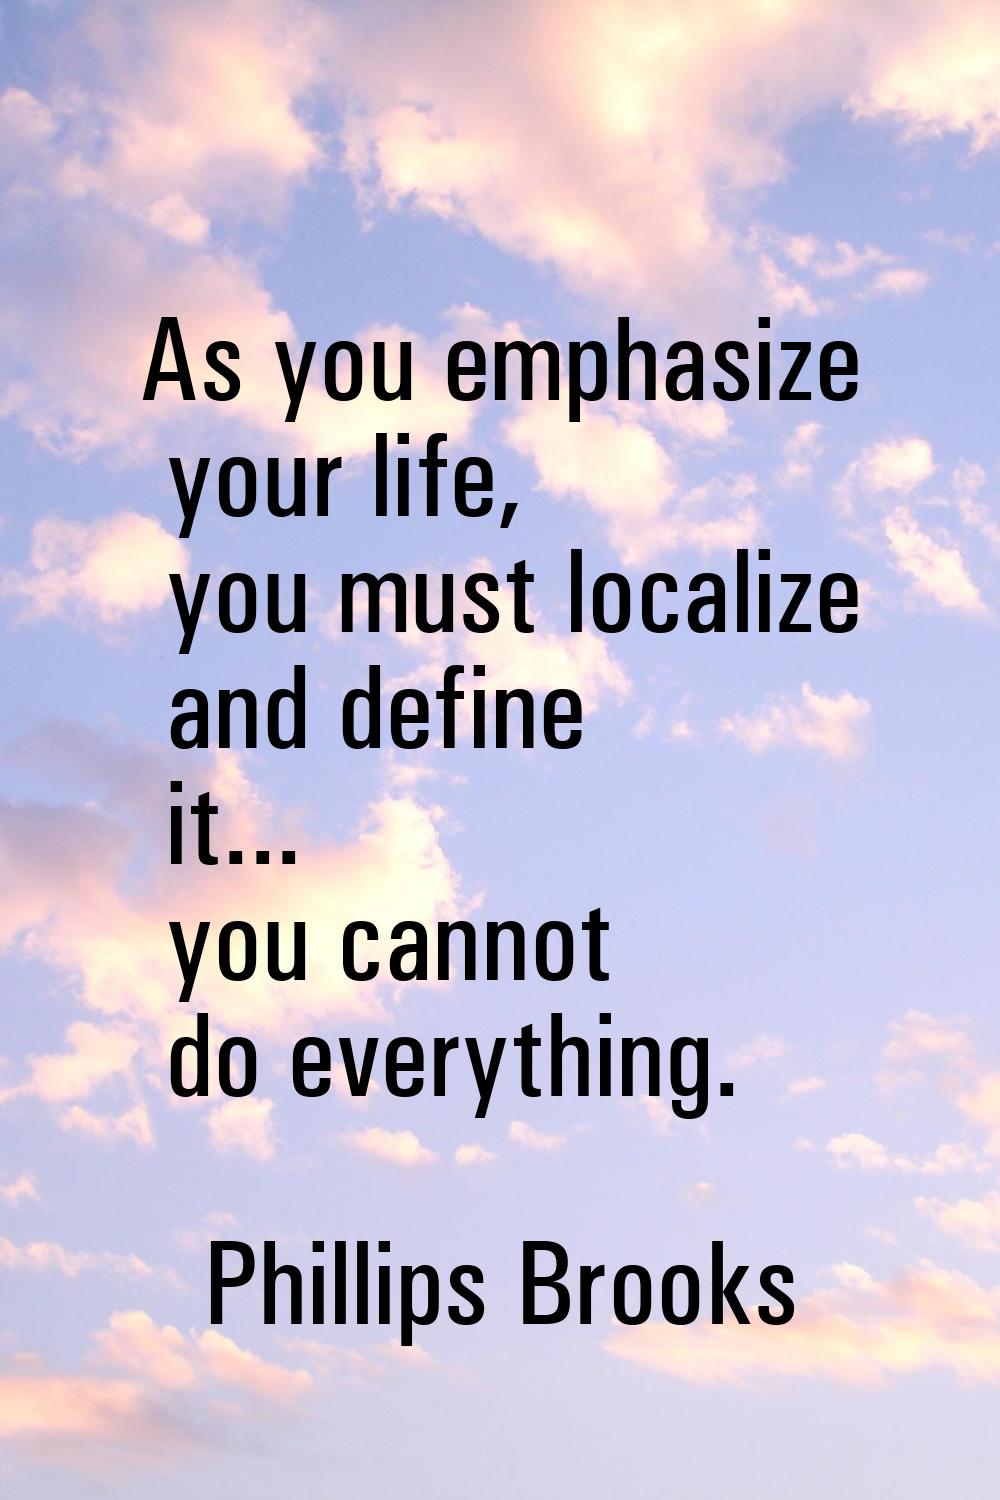 As you emphasize your life, you must localize and define it... you cannot do everything.